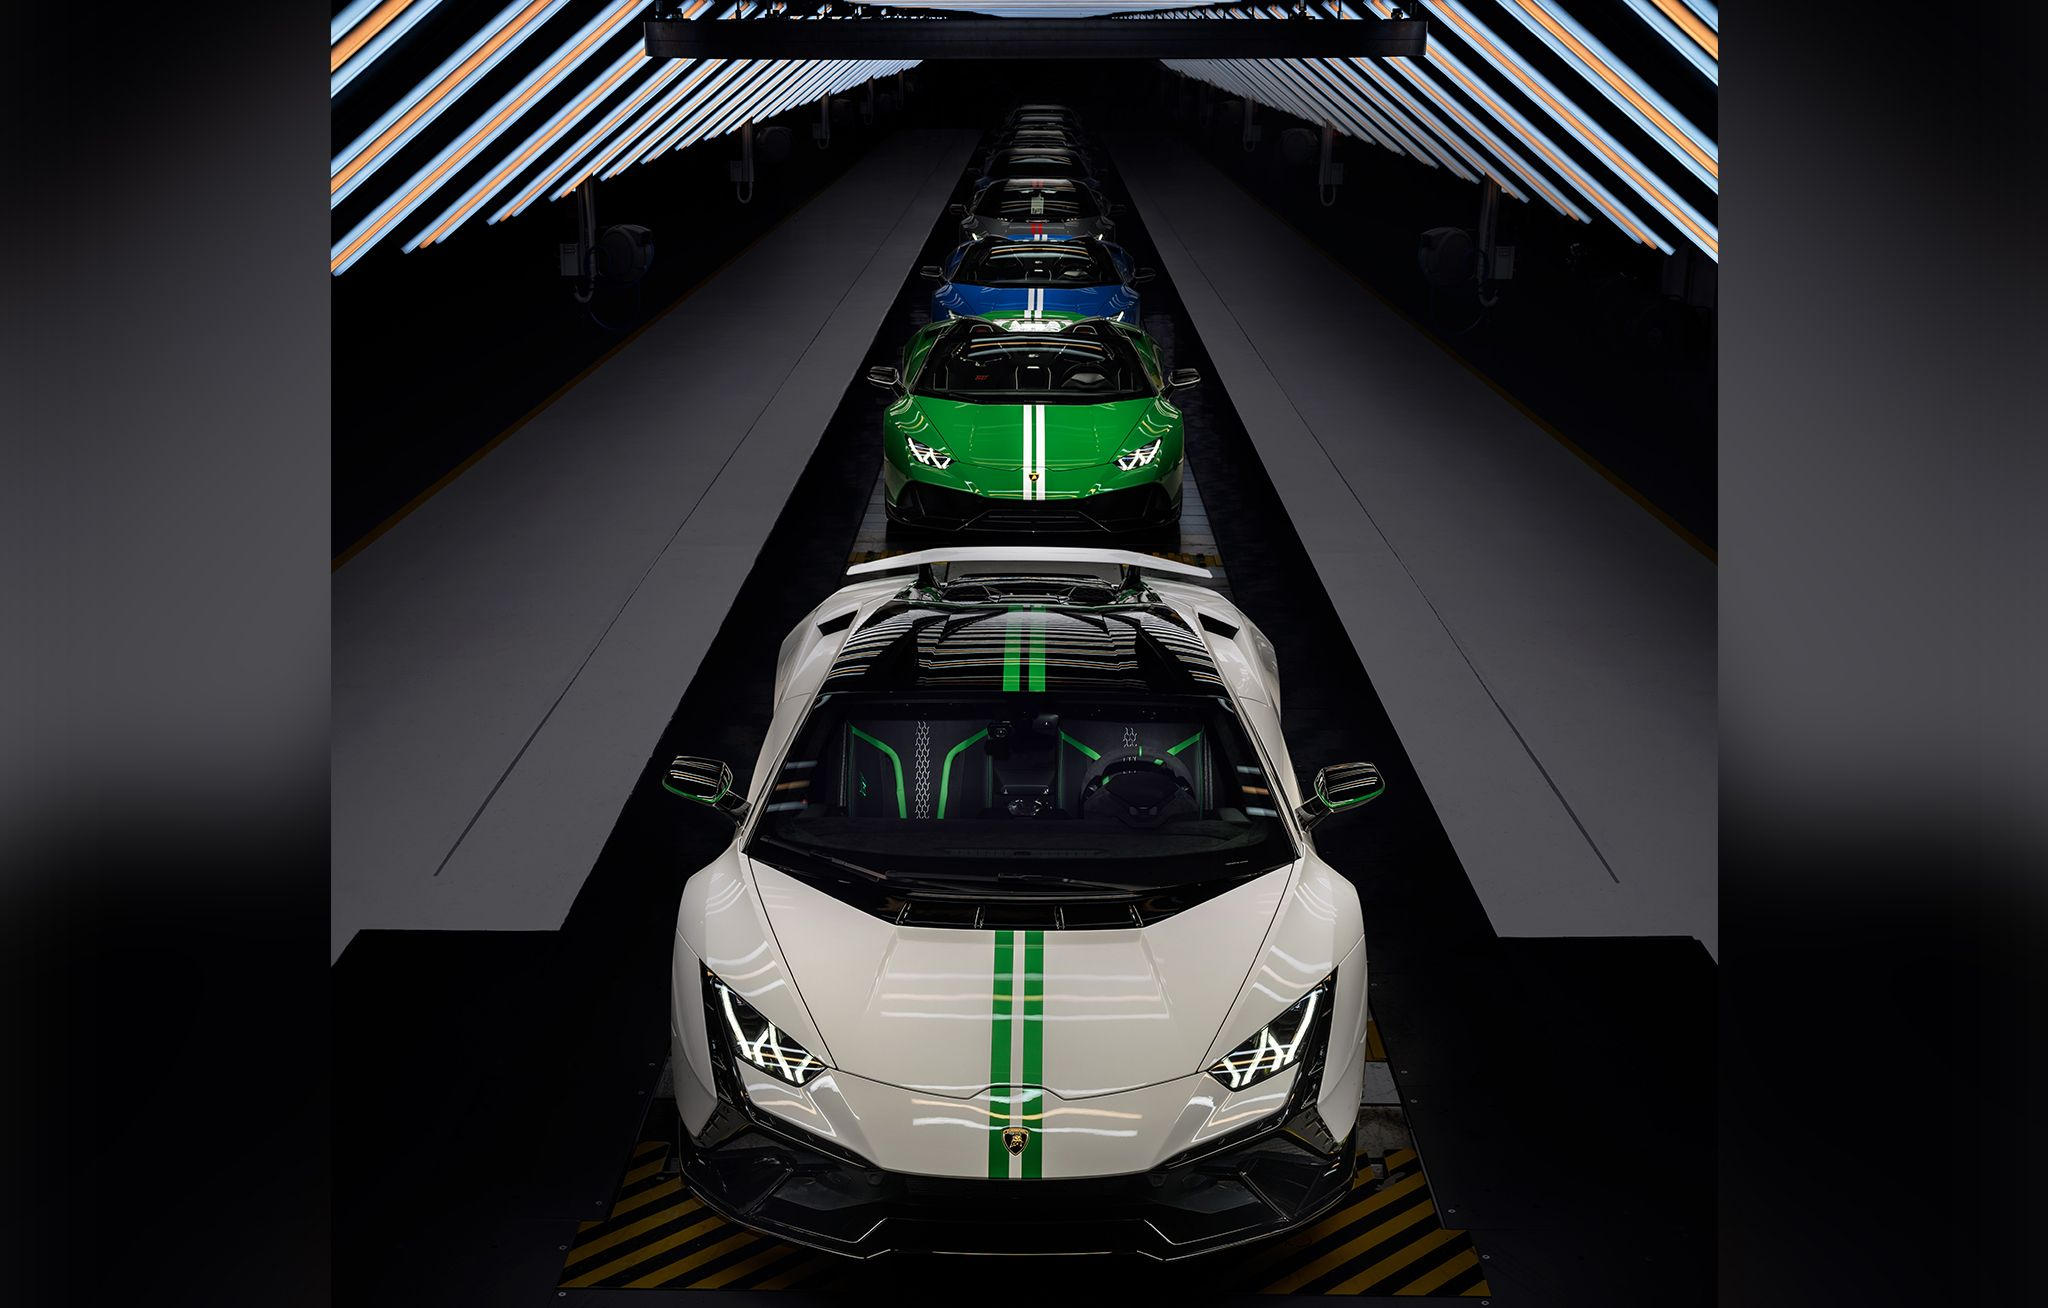 Lamborghini celebrates its 60th anniversary - with three limited-edition Huracáns - cChic Magazine Suisse